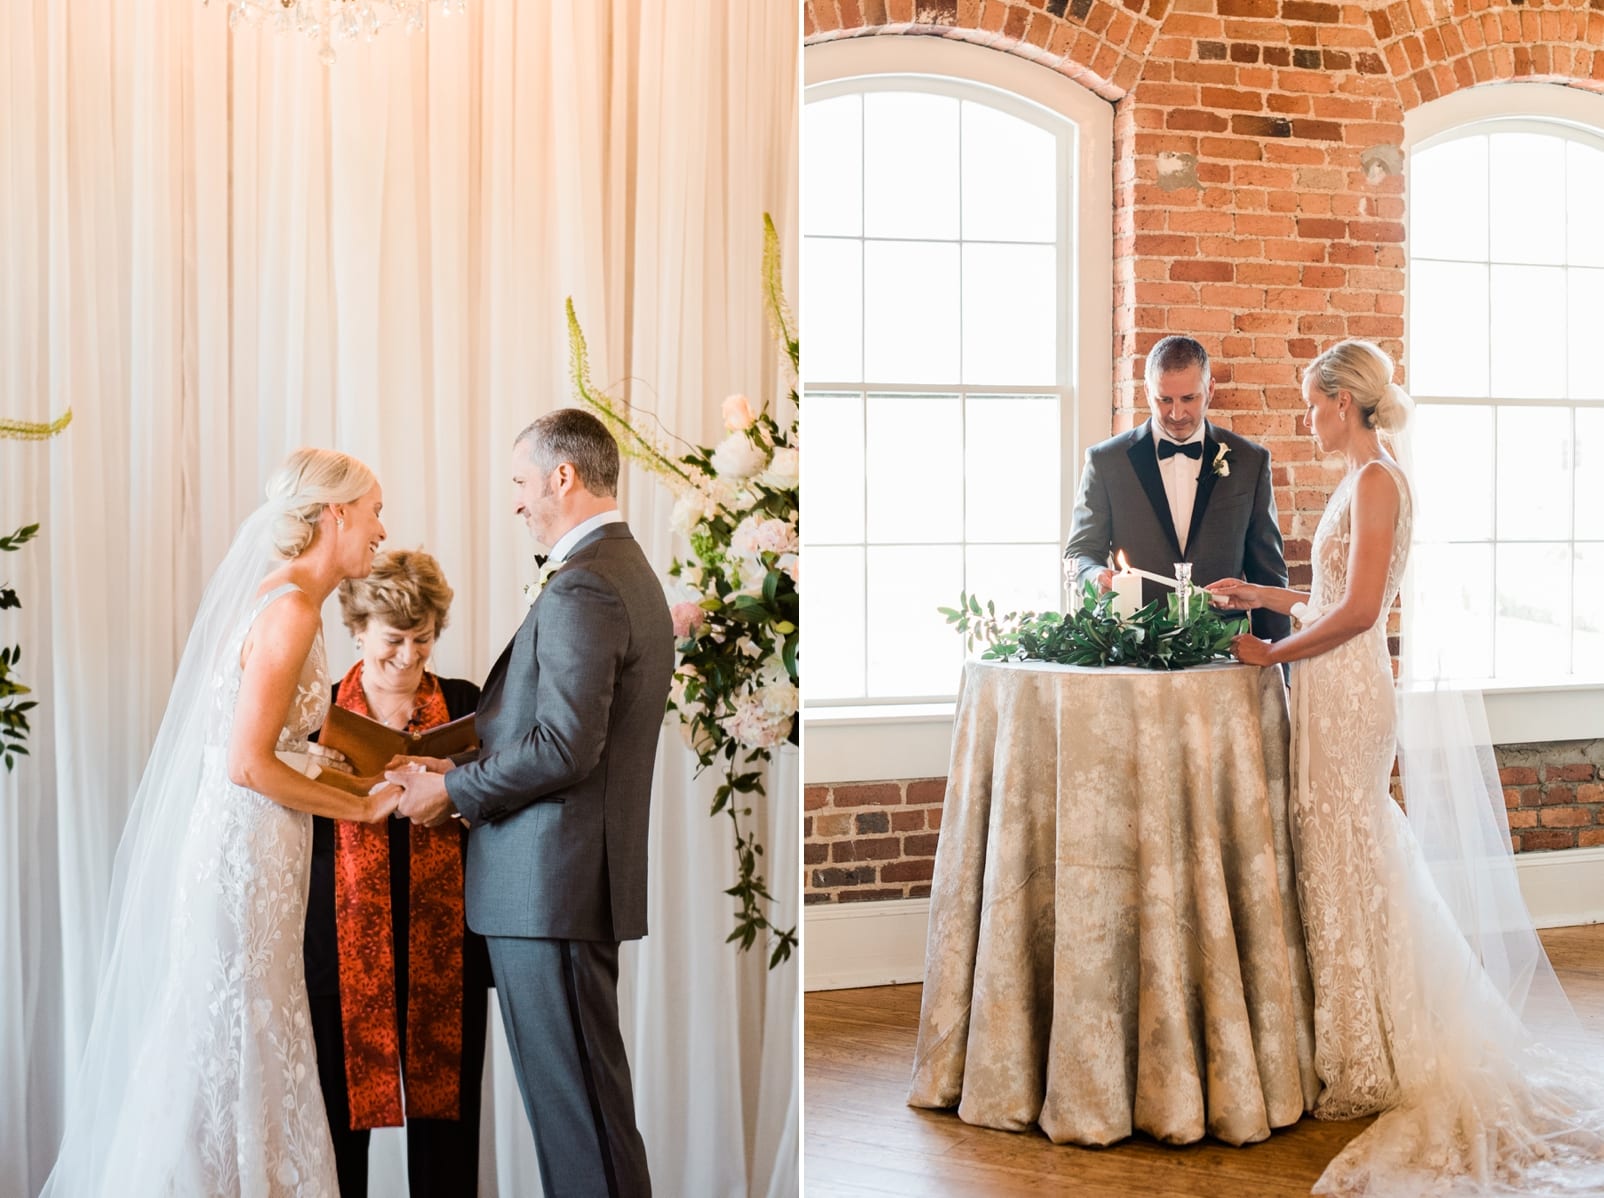 Raleigh bride and groom lighting the unity candle during indoor wedding ceremony photo